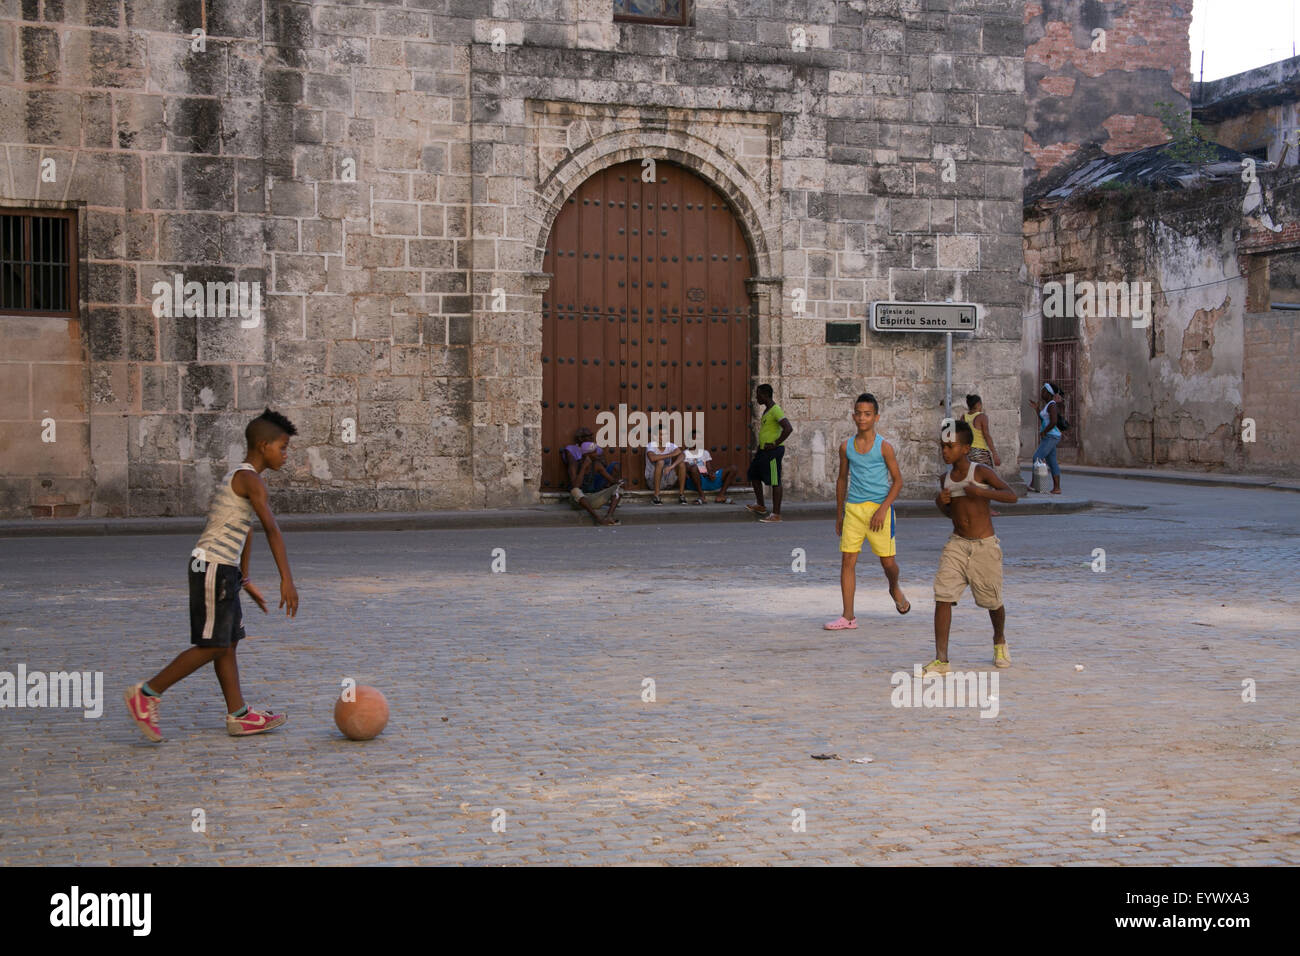 Kids playing soccer in an empty square in Old Havana, Cuba. Stock Photo